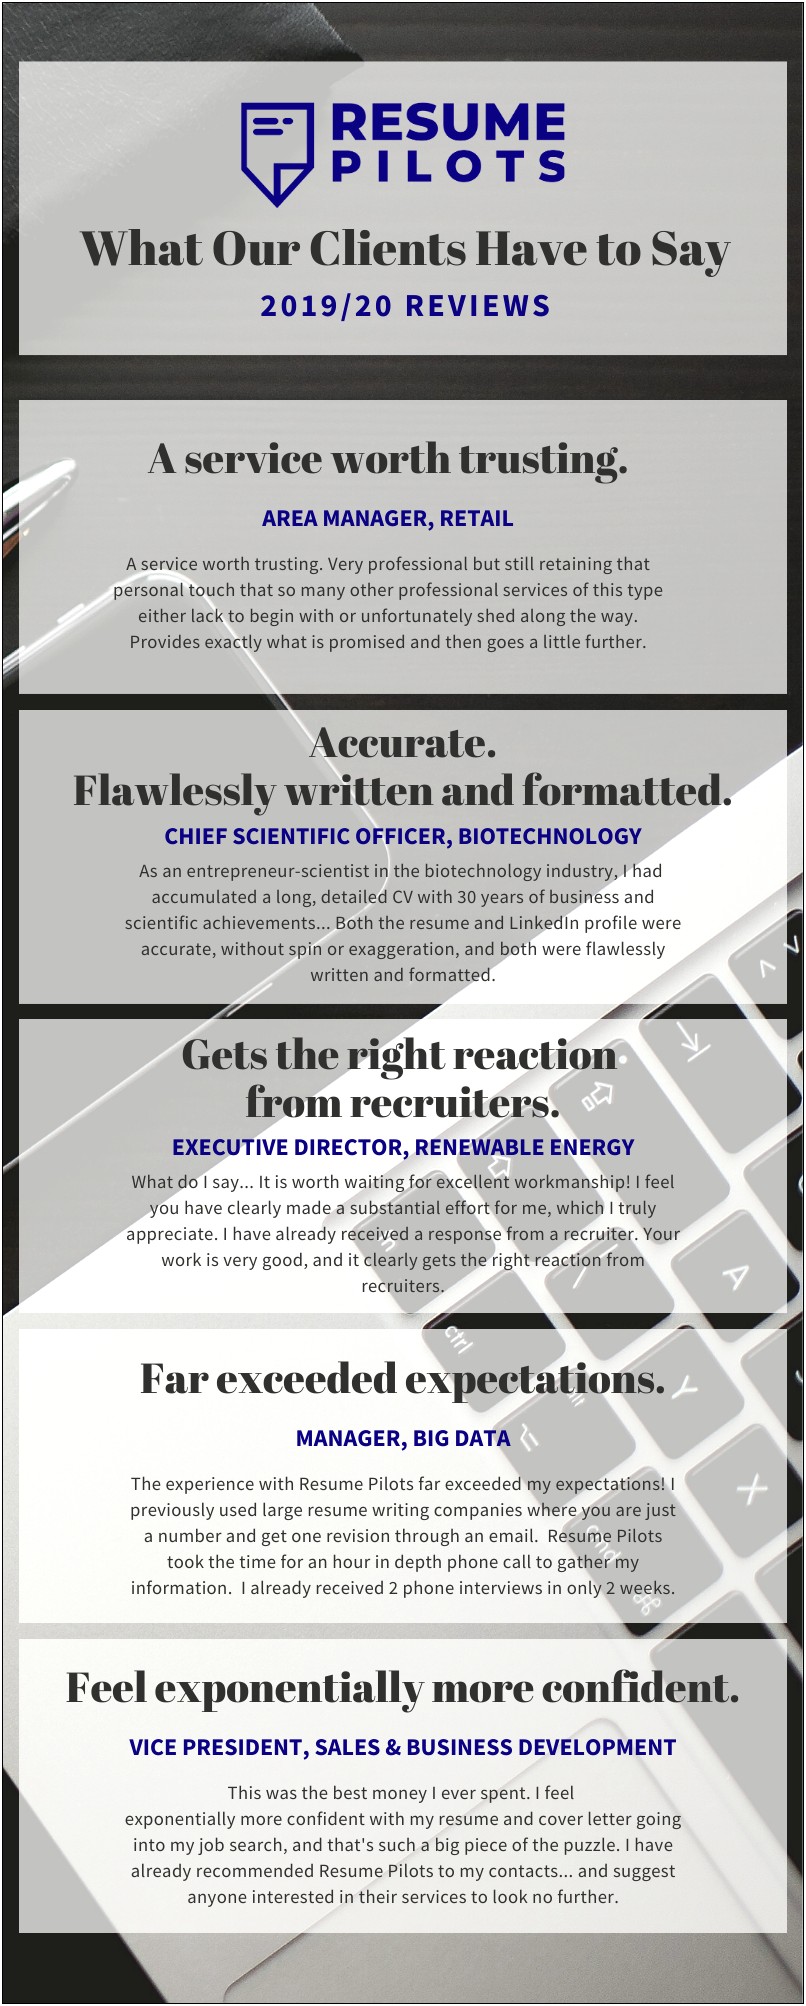 Best Resume For A Writer